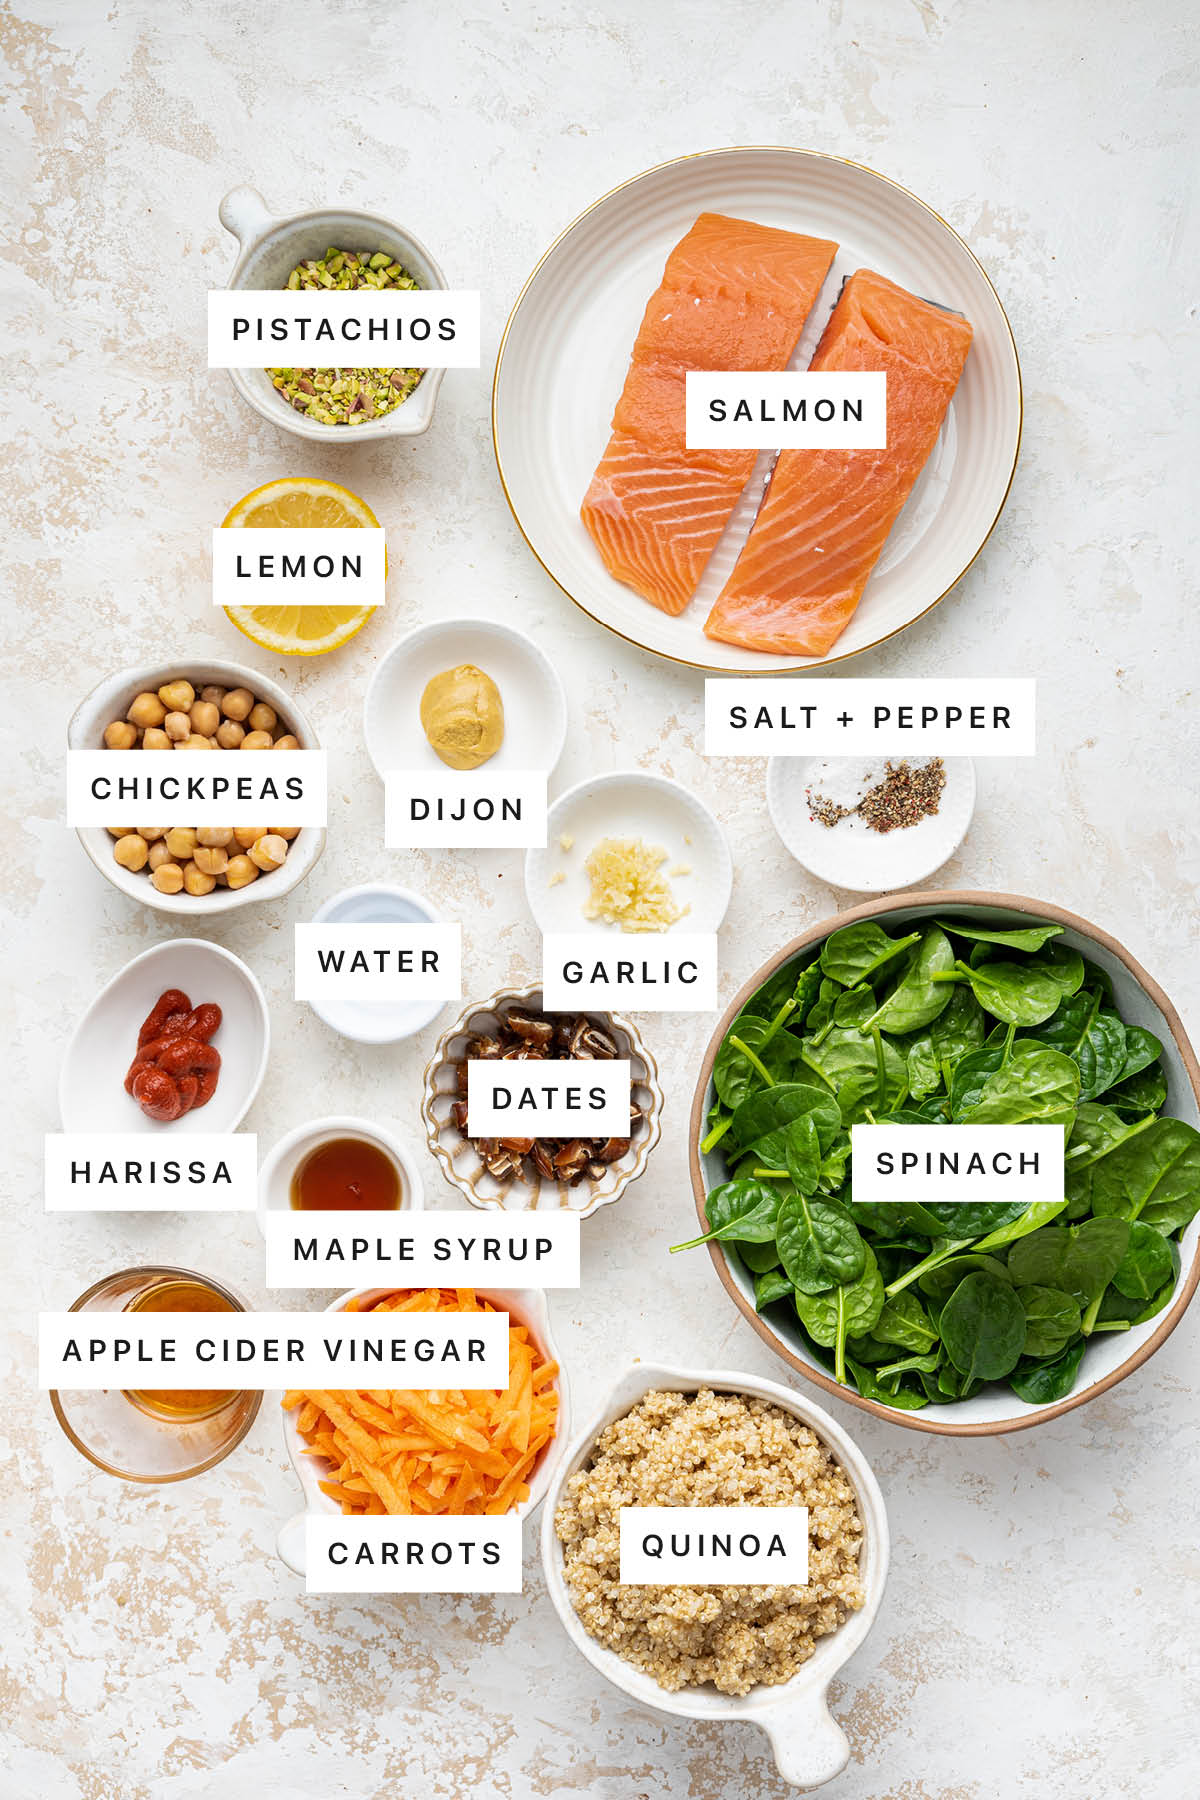 Ingredients measured out to make Pistachio Salmon Salad with Spicy Harissa Dressing: pistachios, salmon, lemon, dijon, chickpeas, salt, pepper, water, garlic, harissa, dates, spinach, maple syrup, apple cider vinegar, carrots and quinoa.